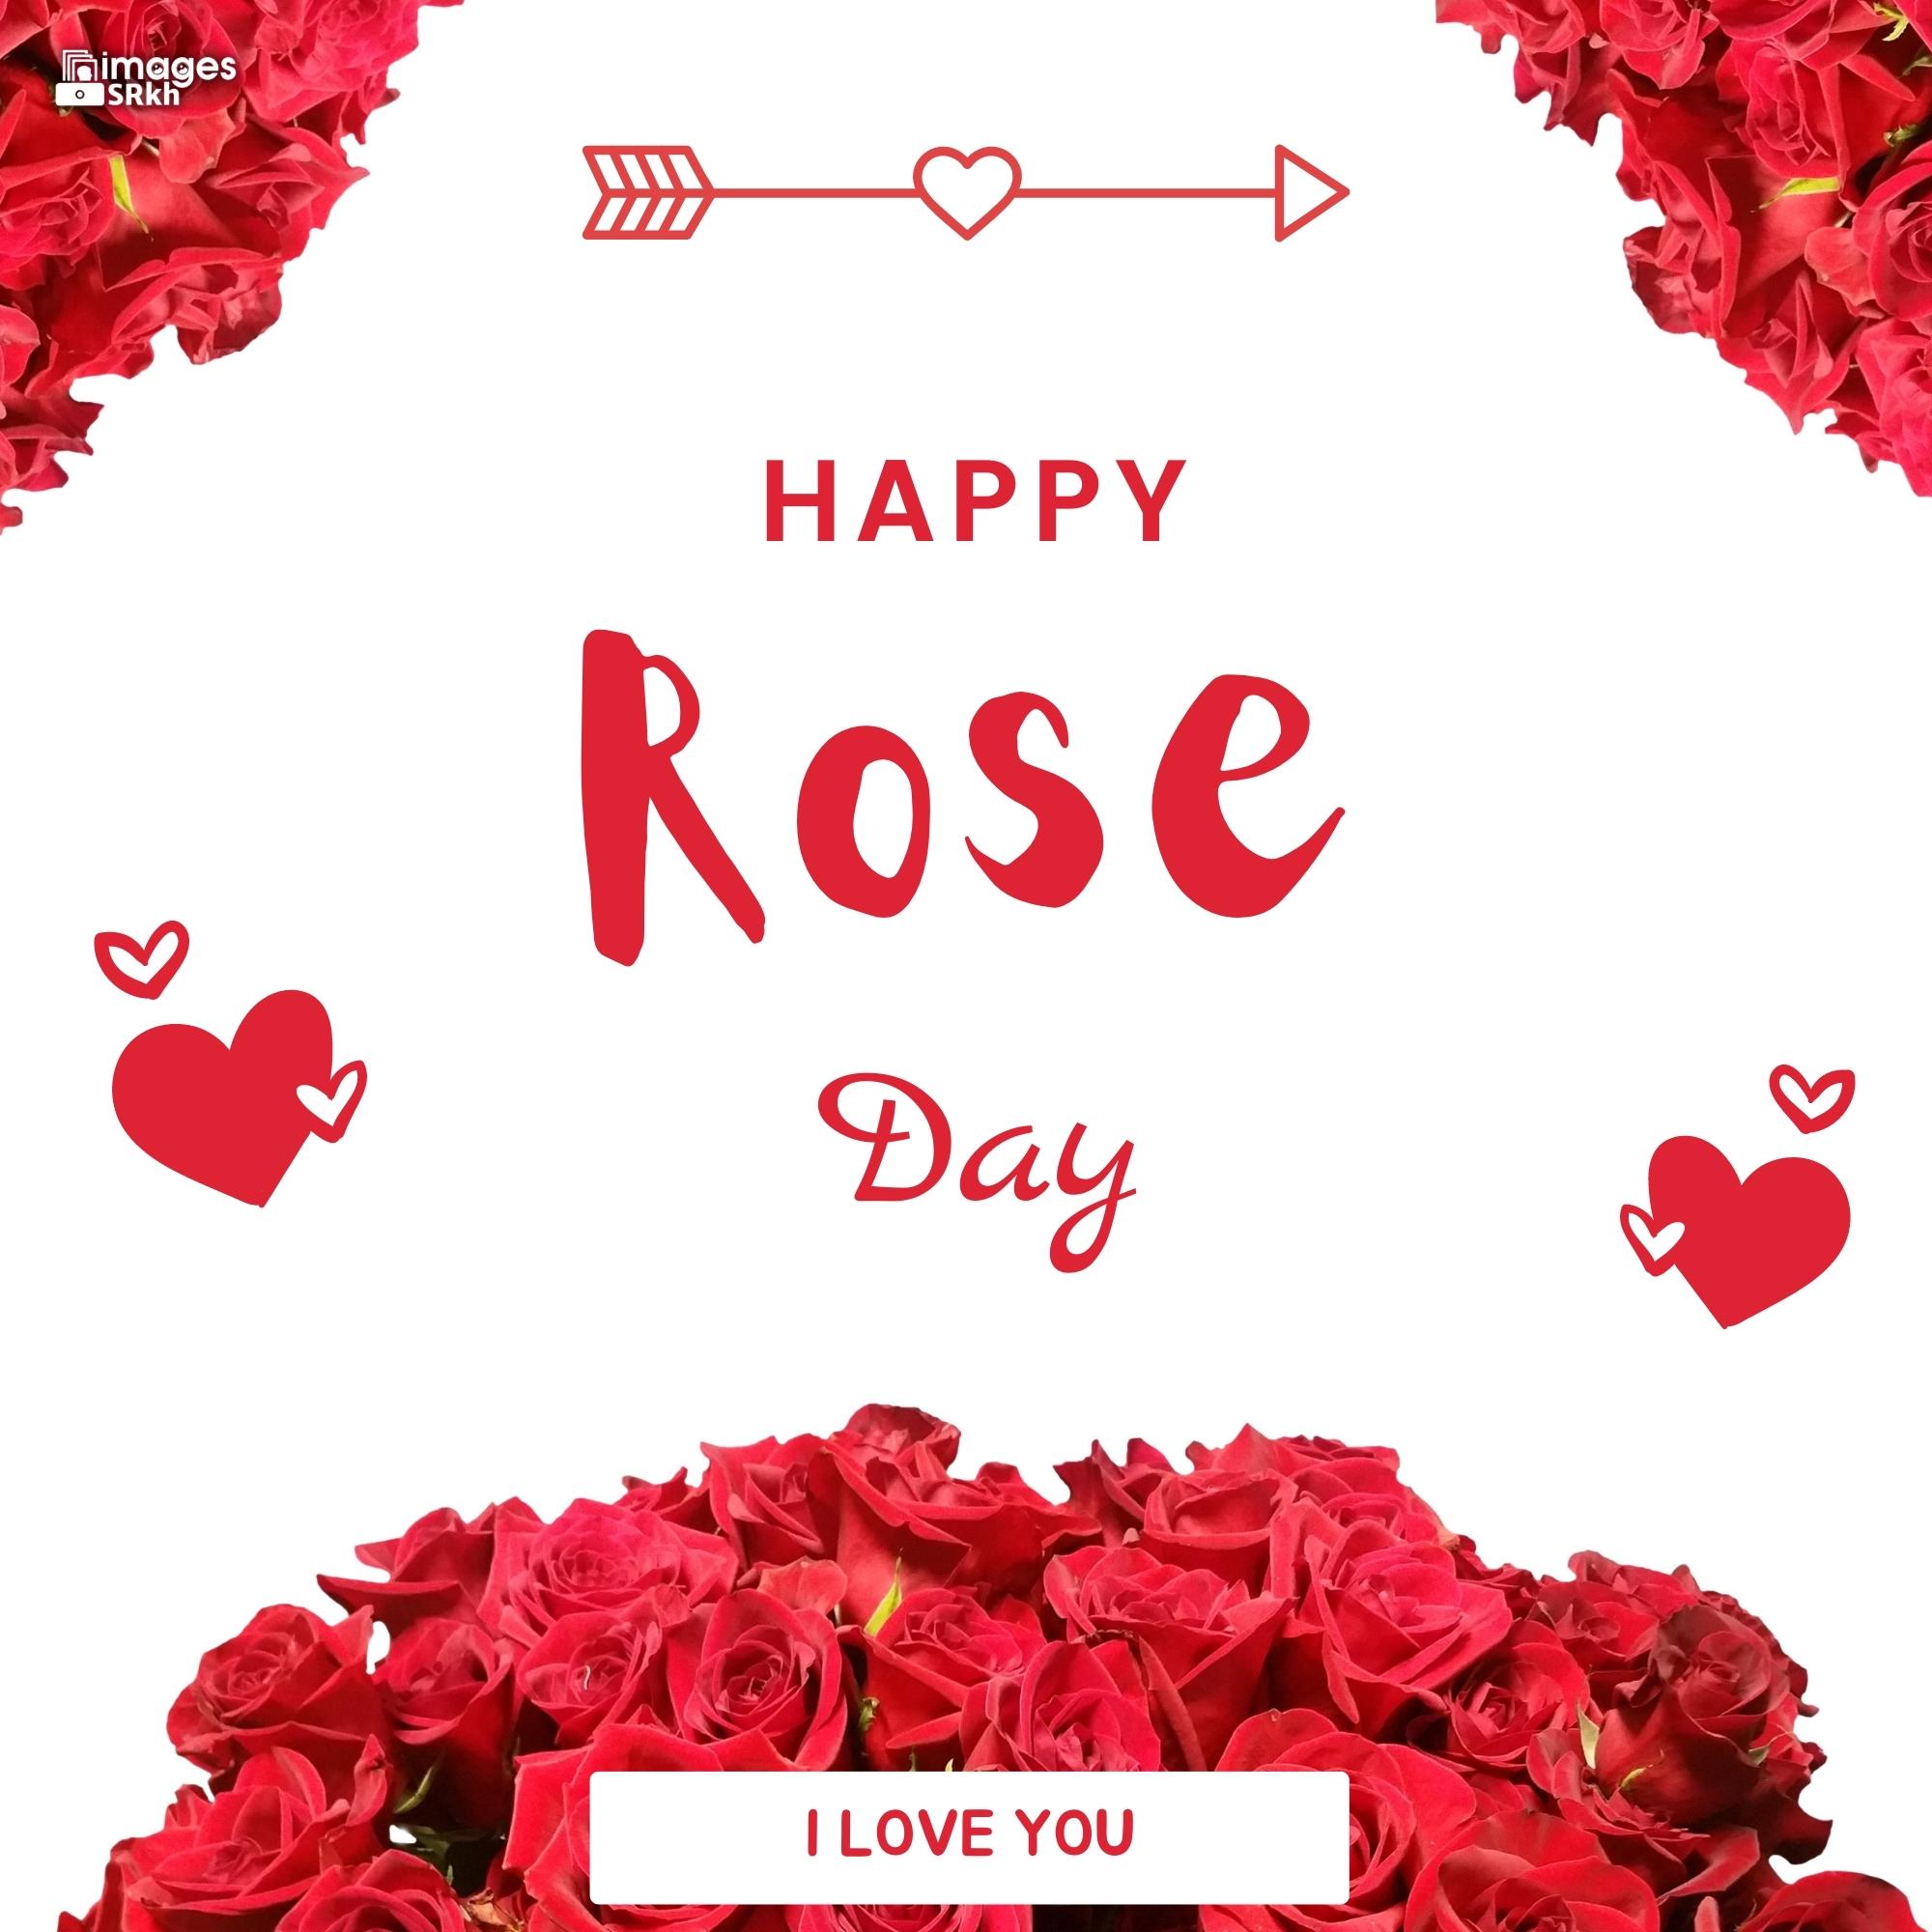 Happy Rose Day Image Hd Download (81)